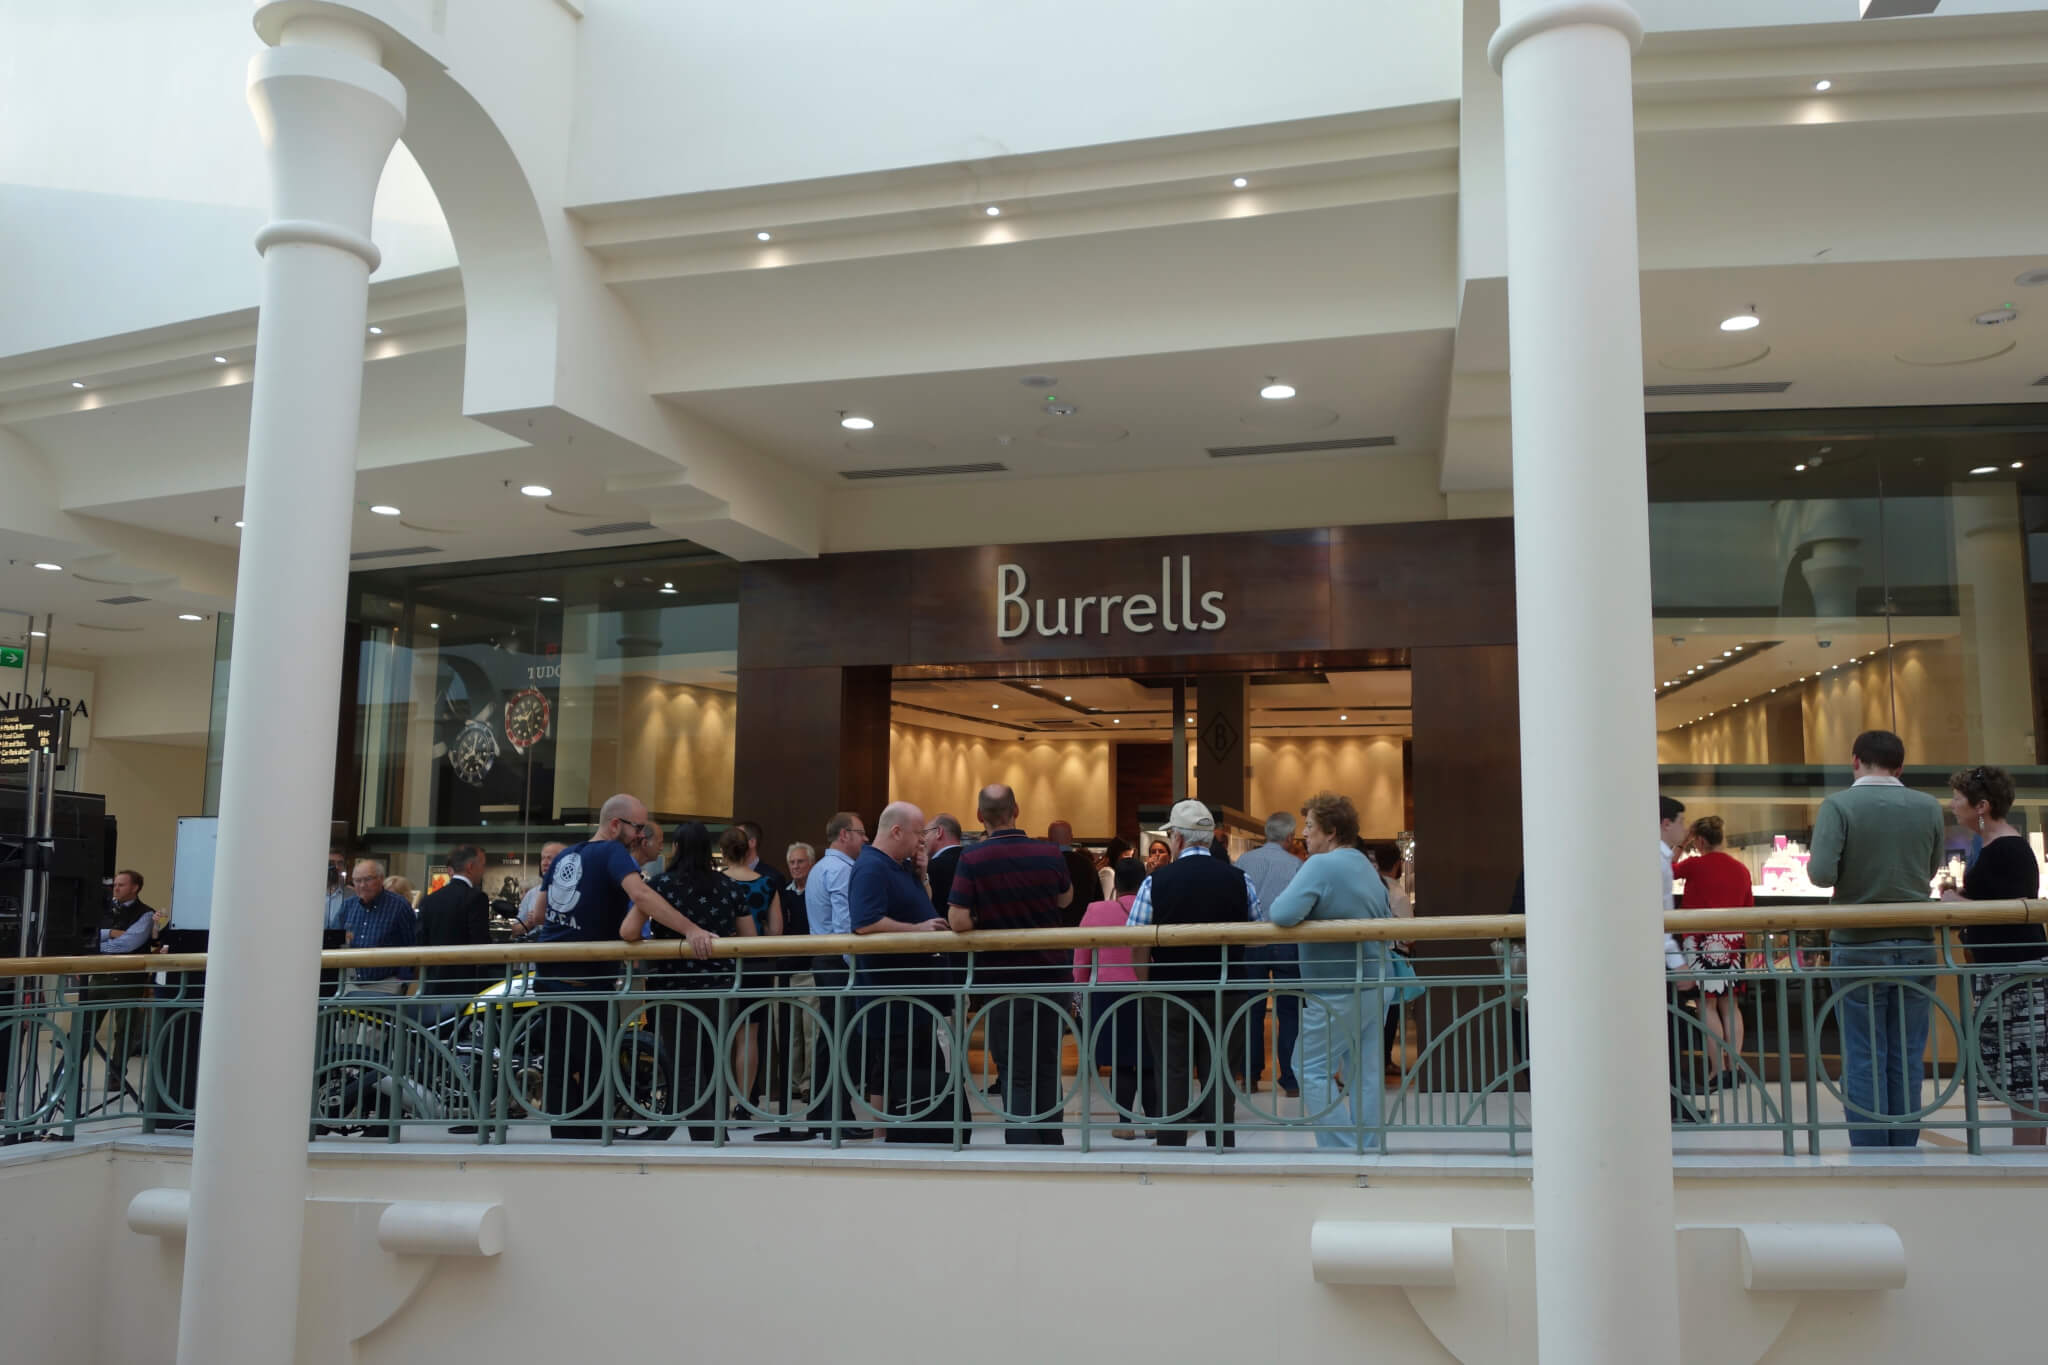 The Burrells store in the Royal Victoria Place shopping center in Tunbridge Wells, Kent, England